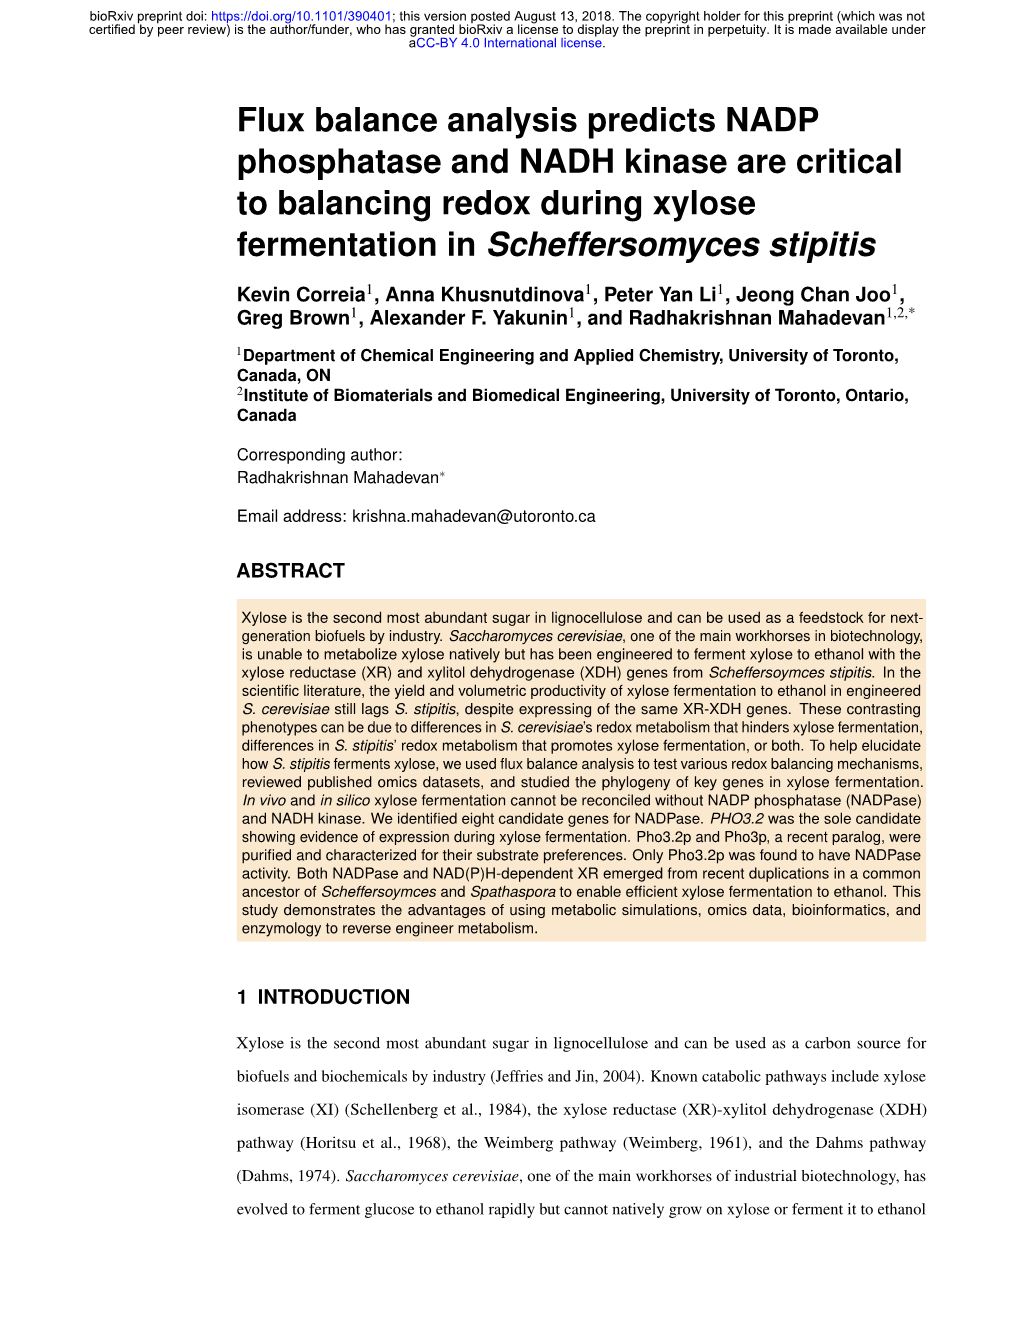 Flux Balance Analysis Predicts NADP Phosphatase and NADH Kinase Are Critical to Balancing Redox During Xylose Fermentation in Scheffersomyces Stipitis